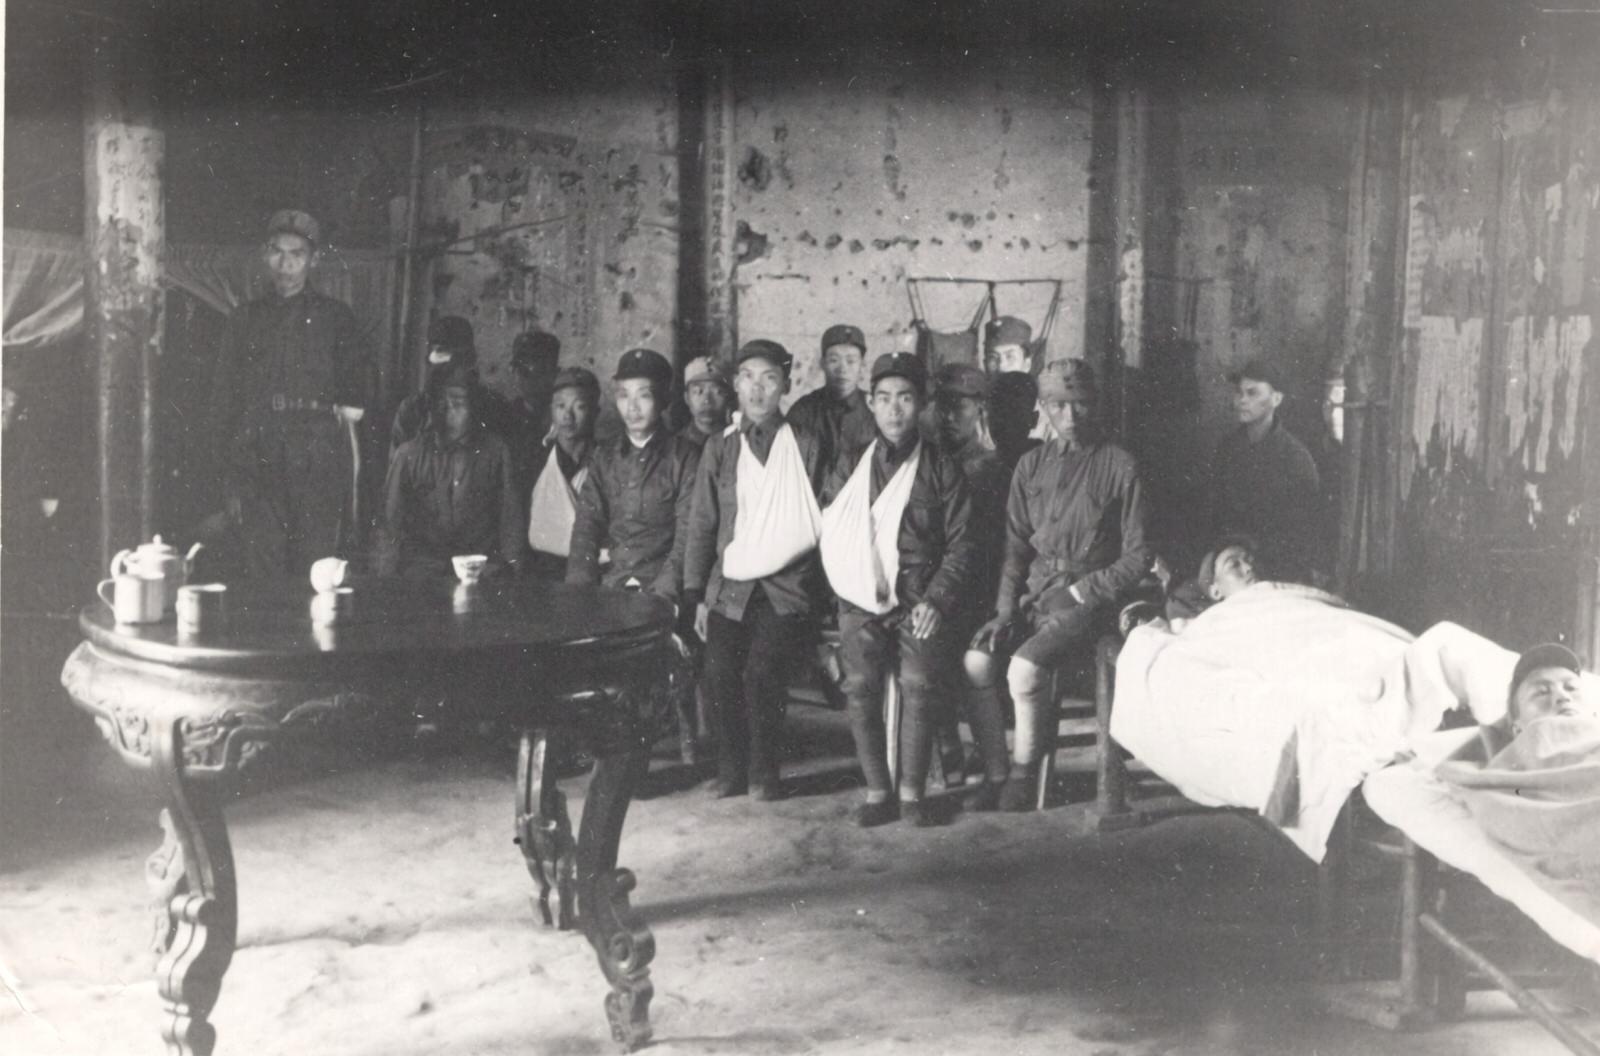 In Central Anhwei (Anhui) the maimed soldiers of the New Fourth Army welcomed me and told me their stories. 1937-1940